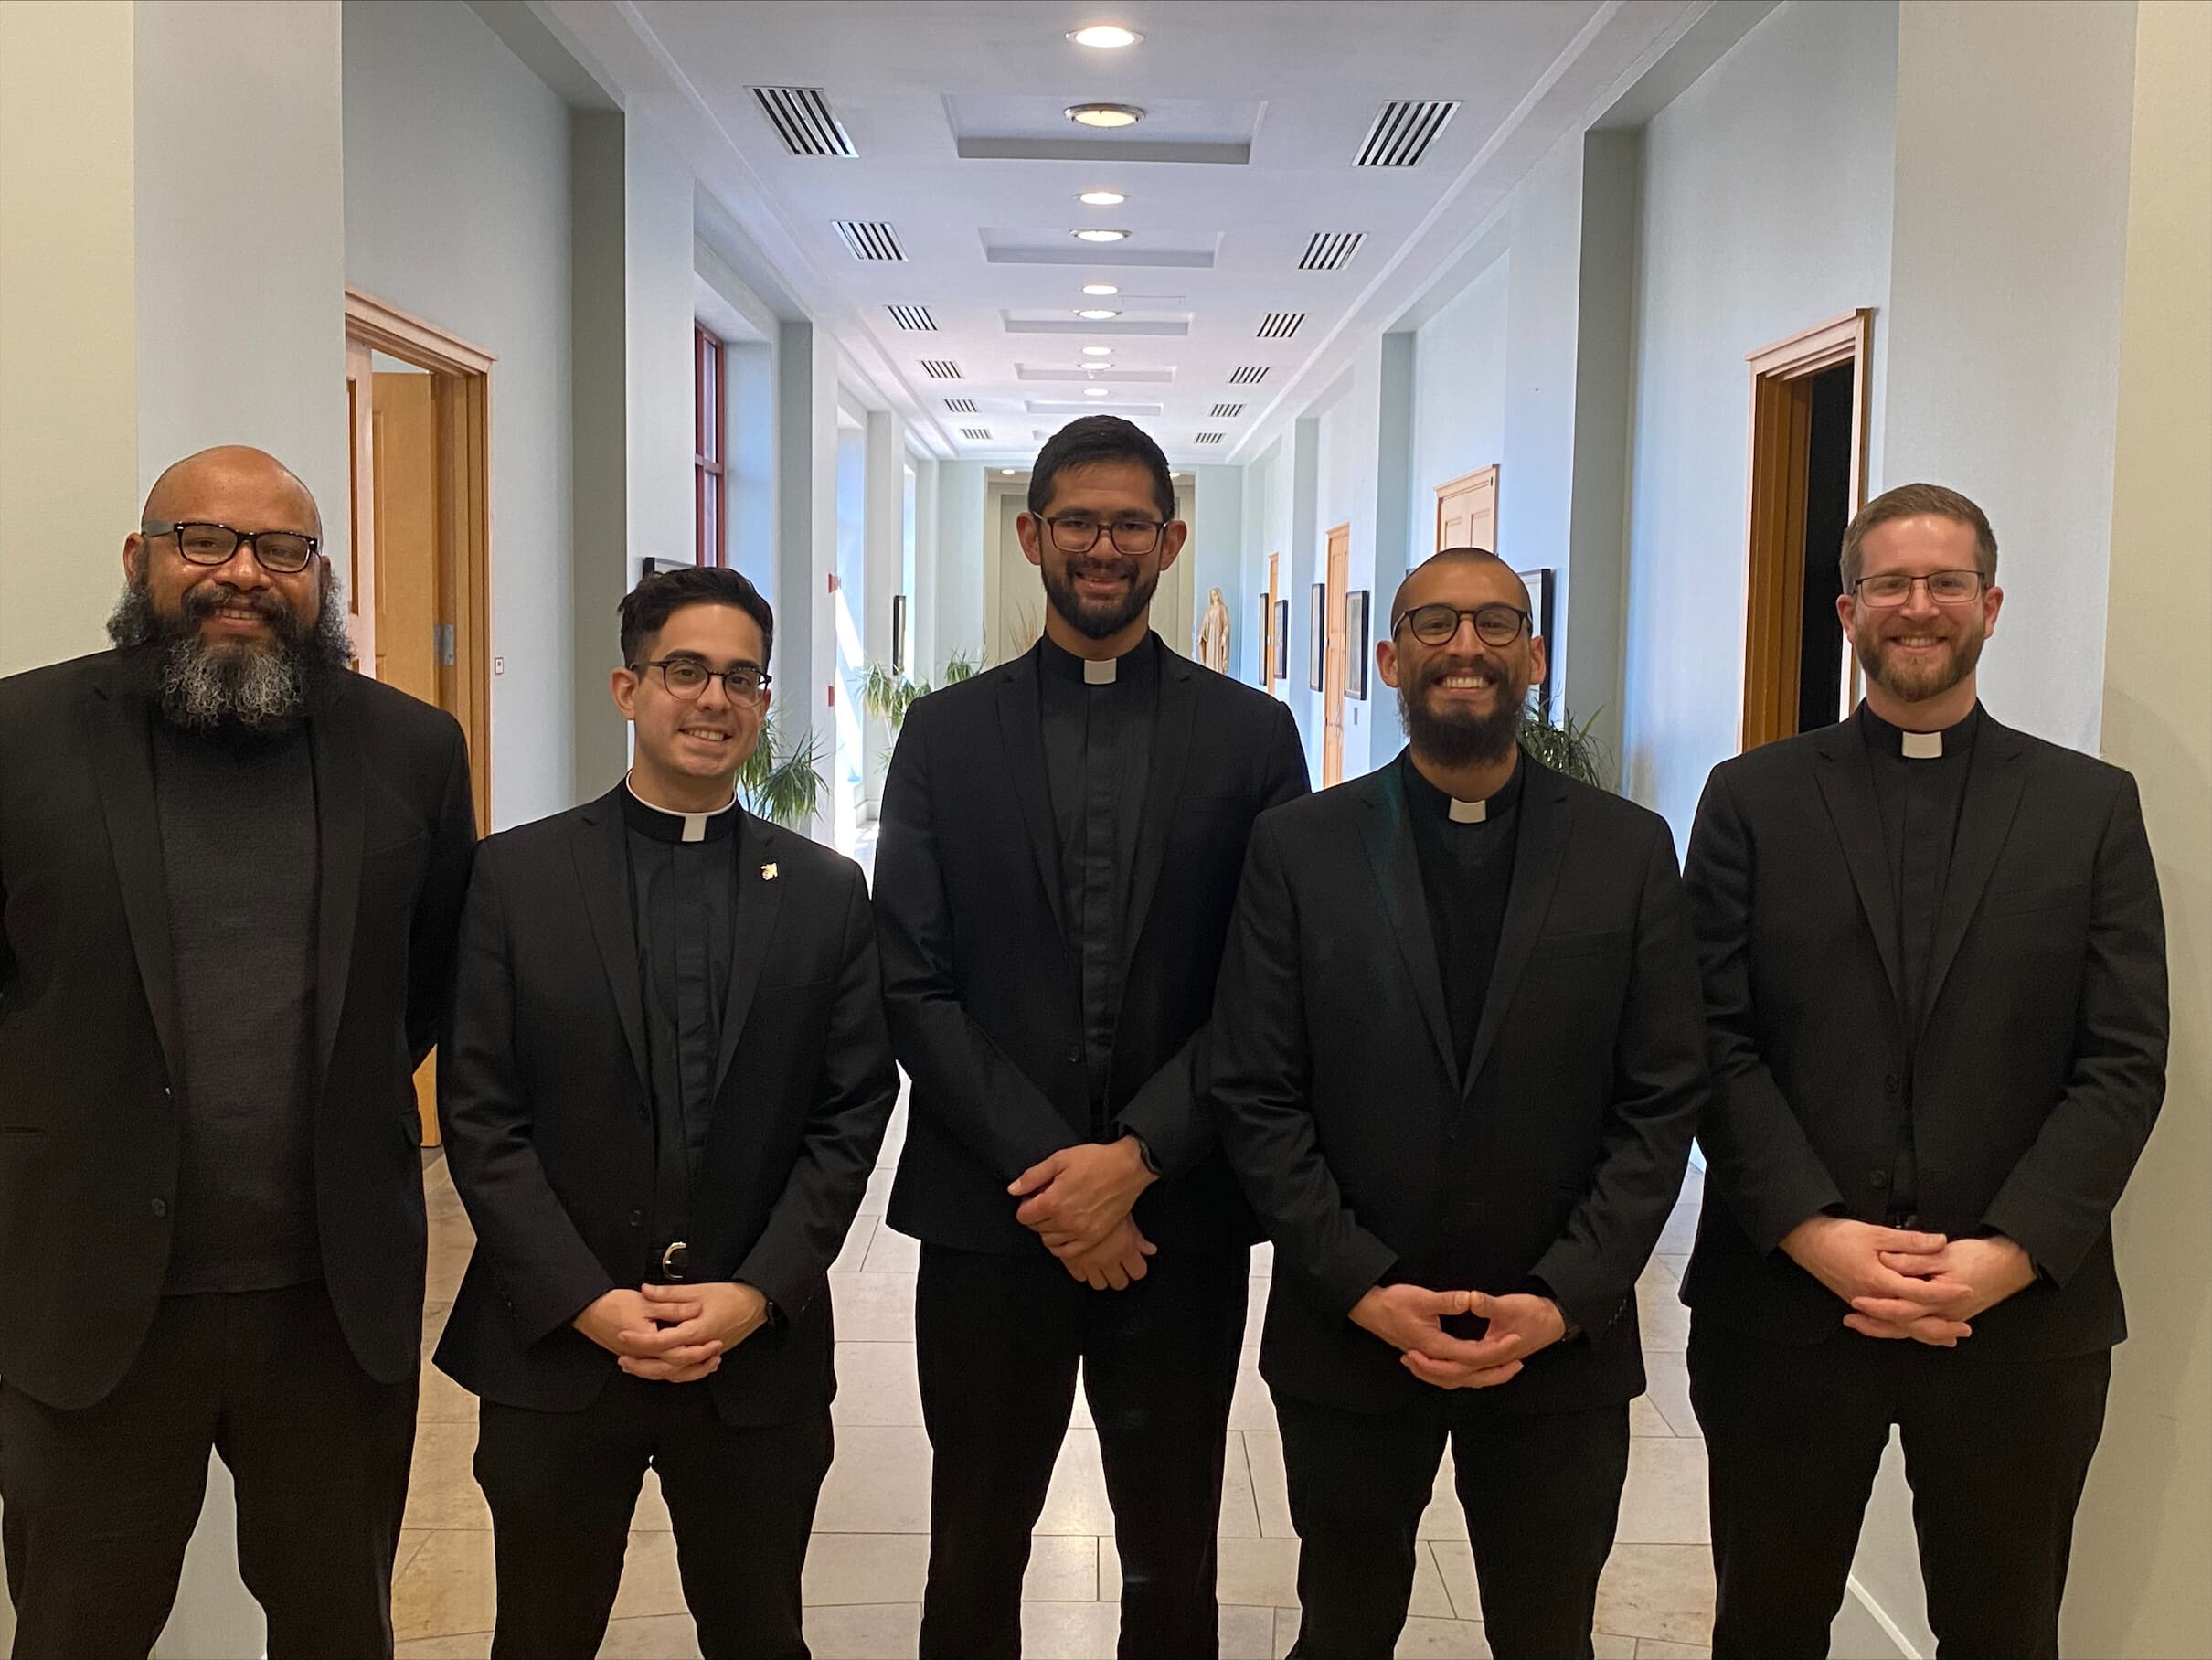 The five men to be ordained priests for the Archdiocese of Newark on May 28, 2022 from left to right: Roberto Julio Moreno Andrión, Matthew Gonzalez, Ashton Ignacio Francisco Wong, David Hinojosa, and Peter Jacob Volz.